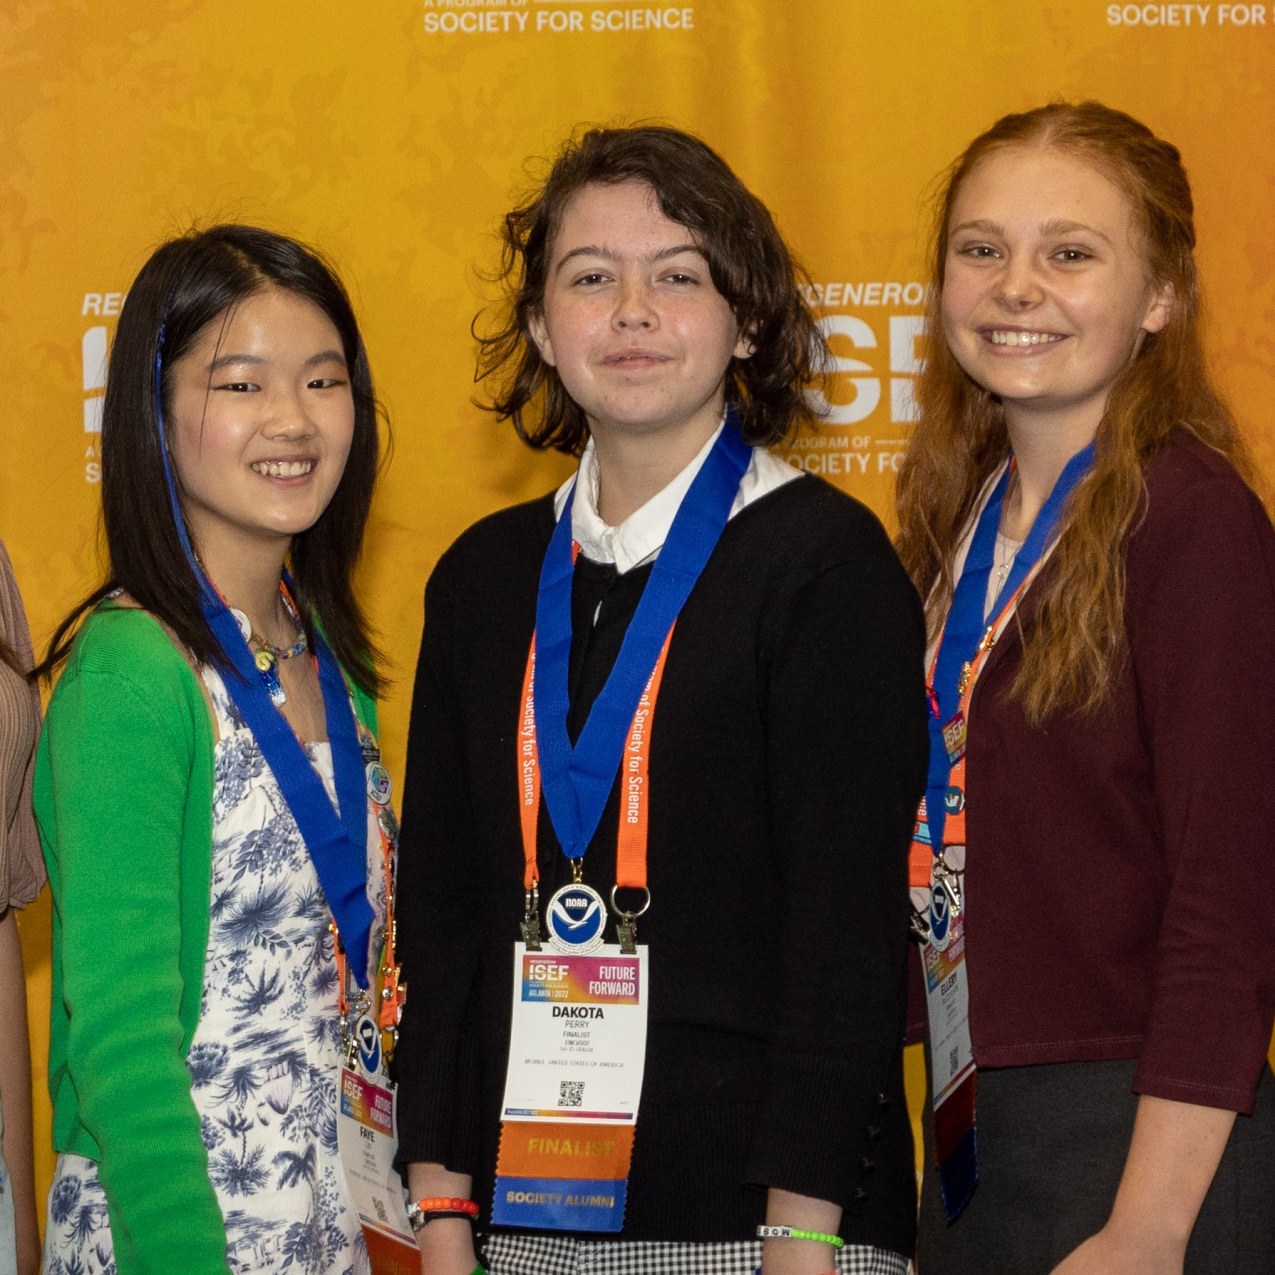 Five smiling high school students wearing NOAA award medals stand in front of an orange background. 